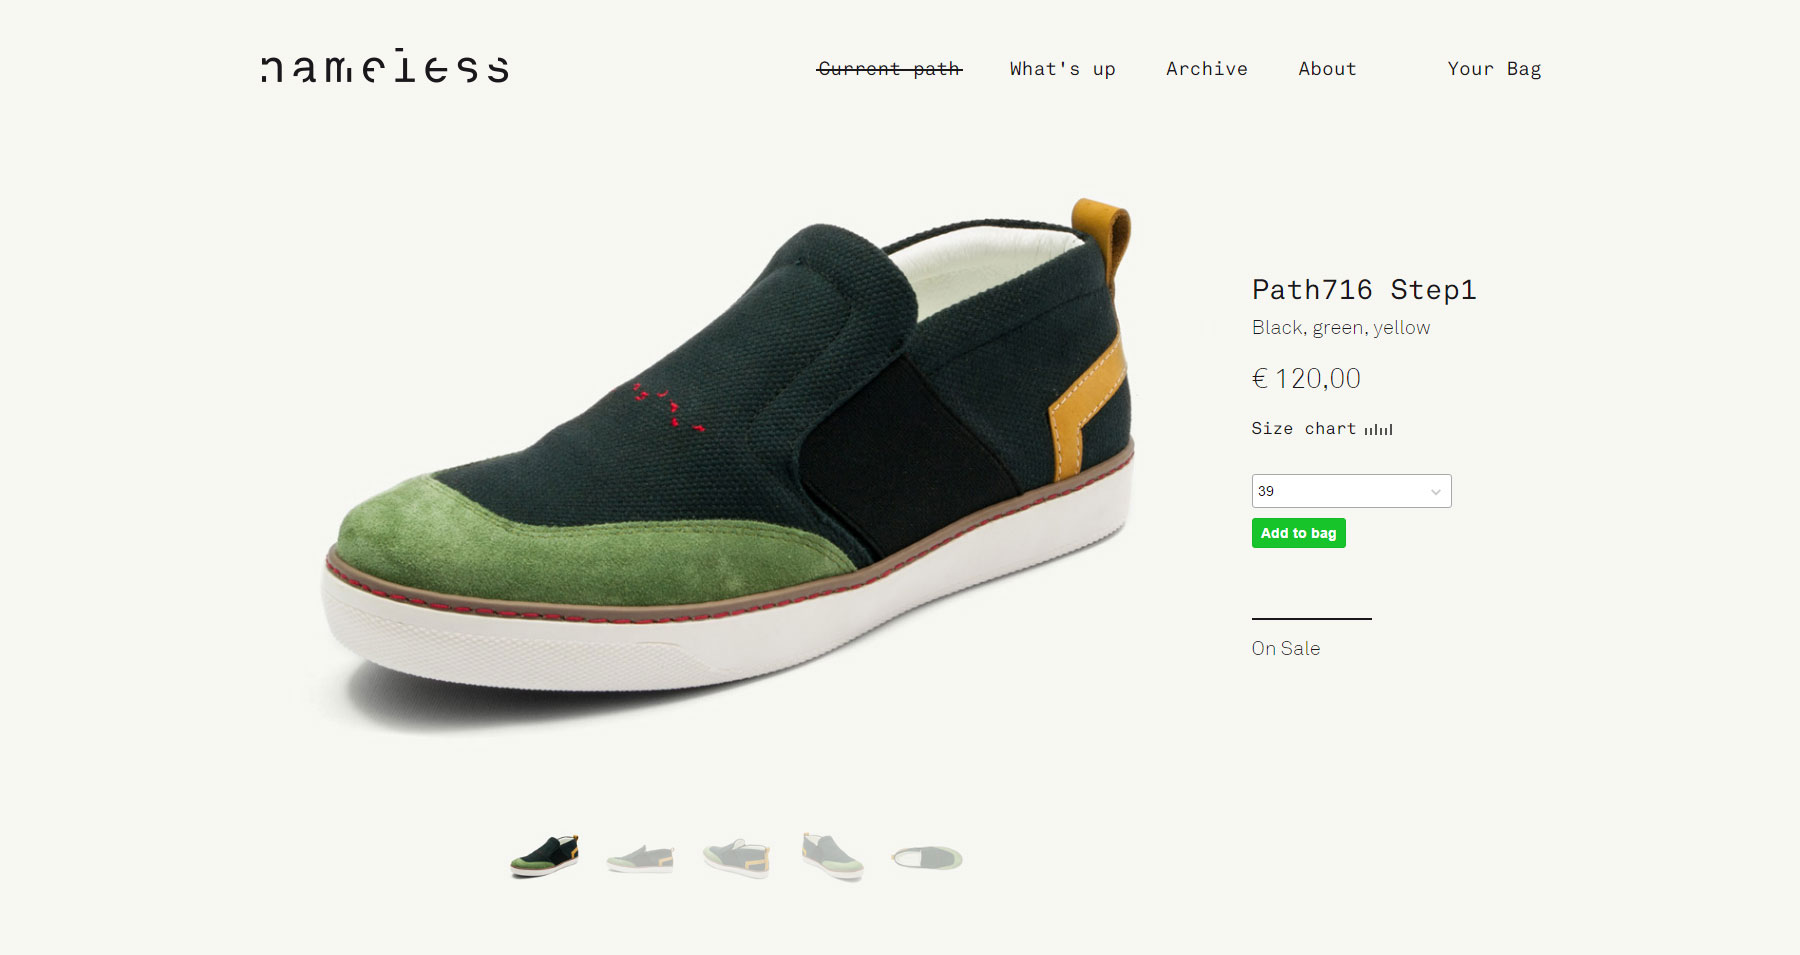 nameless shoes - Website of the Day